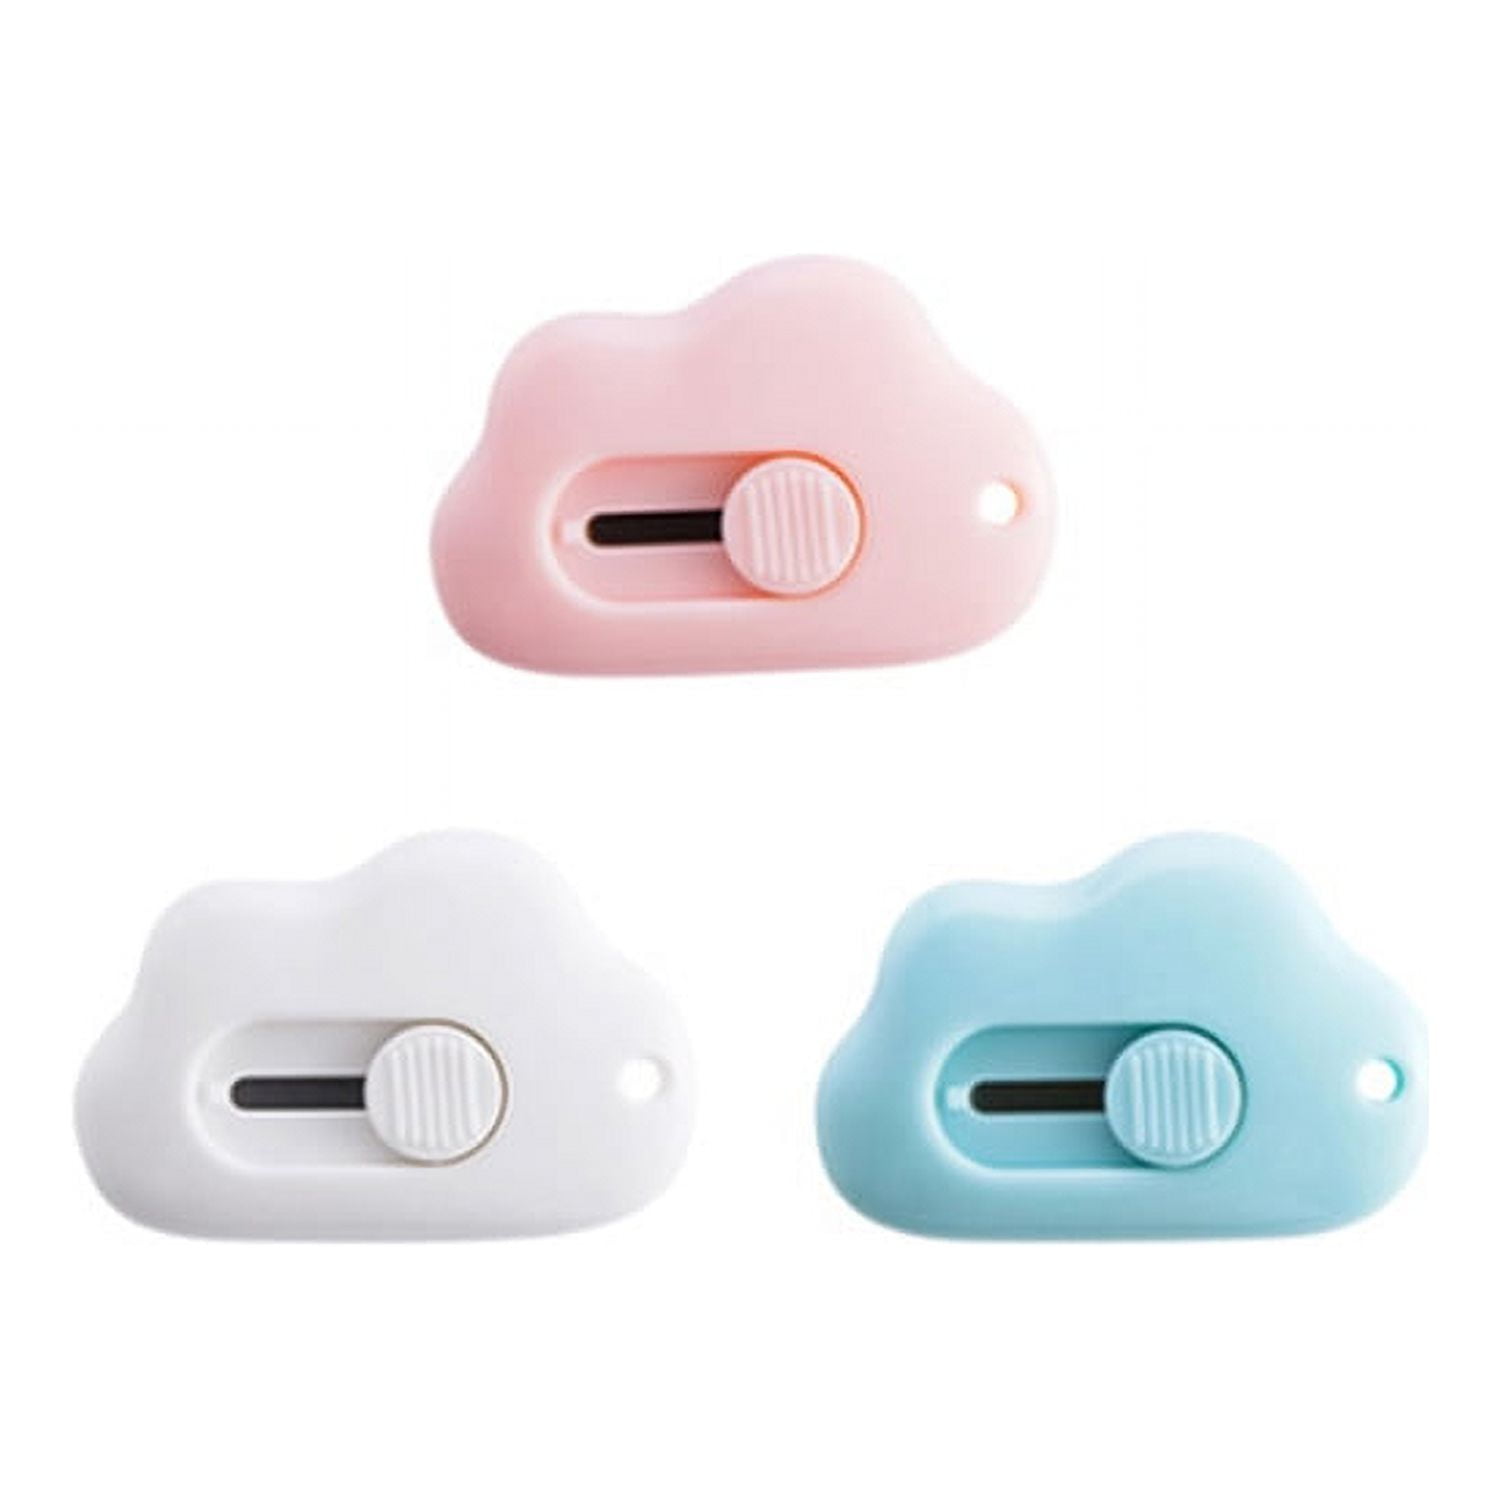 Cute Retractable Box Cutters - 3Pcs Cloud Shaped Mini Art Cutter Utility  Knife Office School Stationery for Cutting Envelopes Letter Paper Cutting  DIY